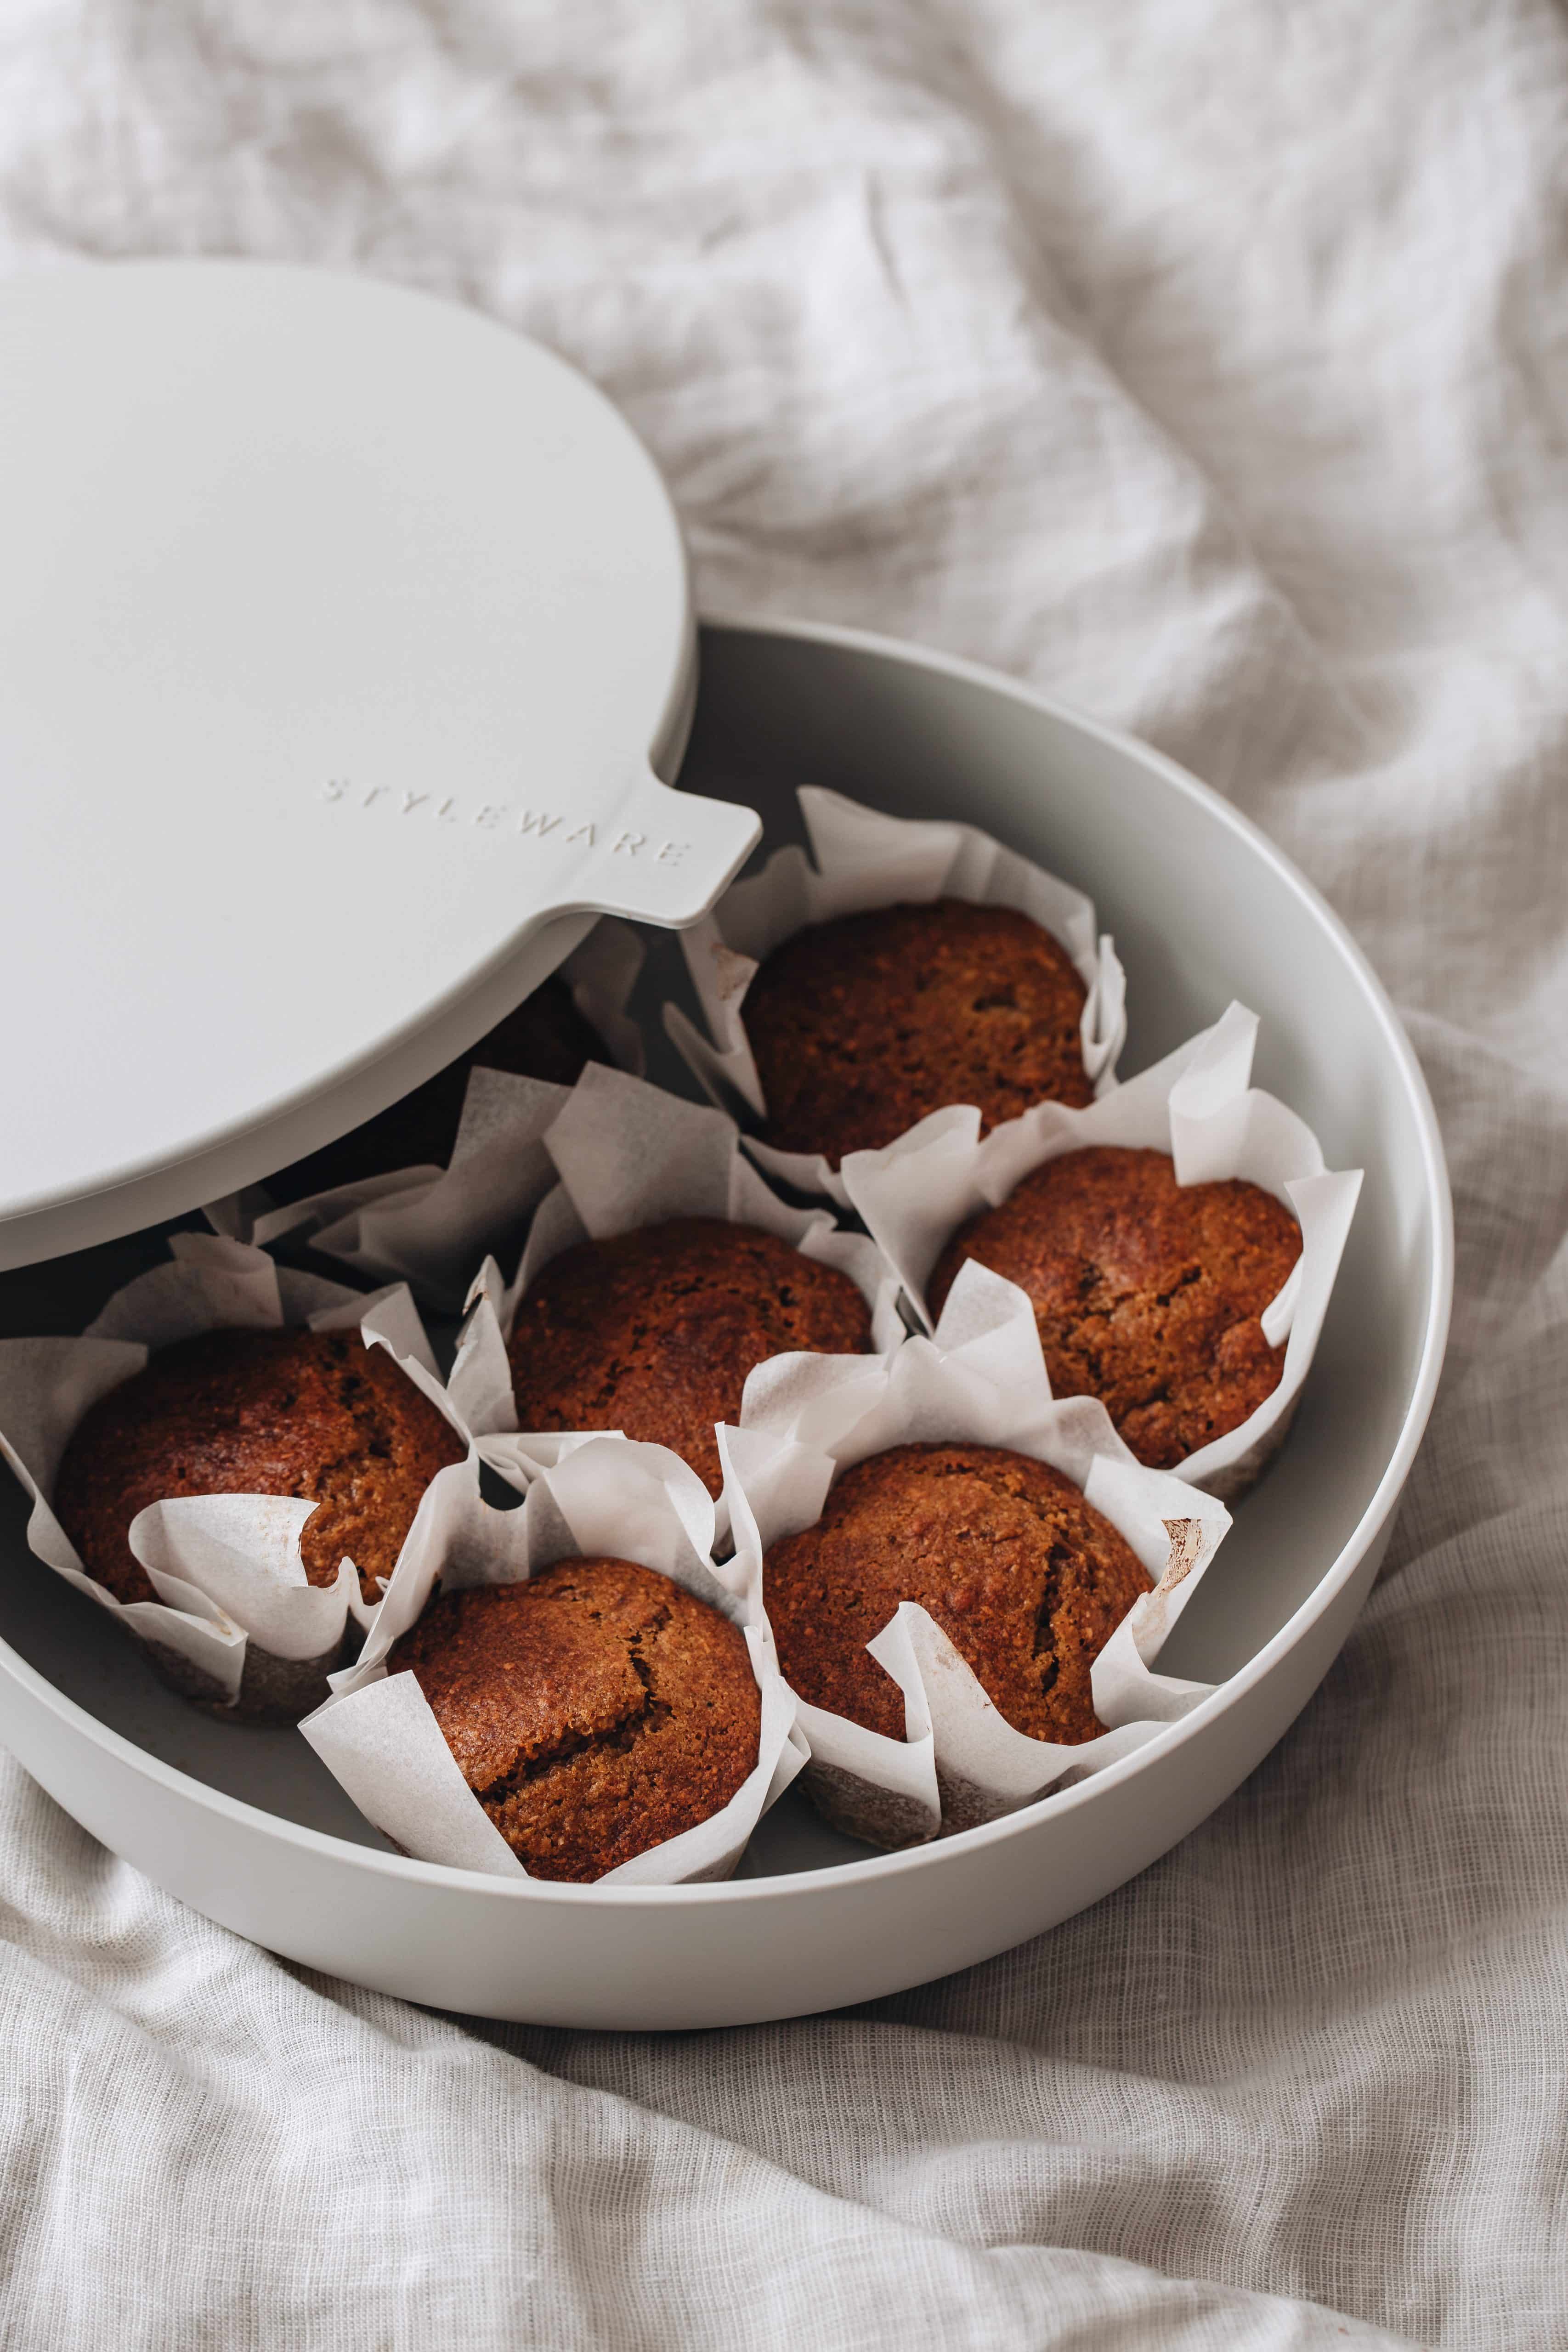 Muffins stored and served in a snap tight nesting bowl with lid are the ideal picnic food.